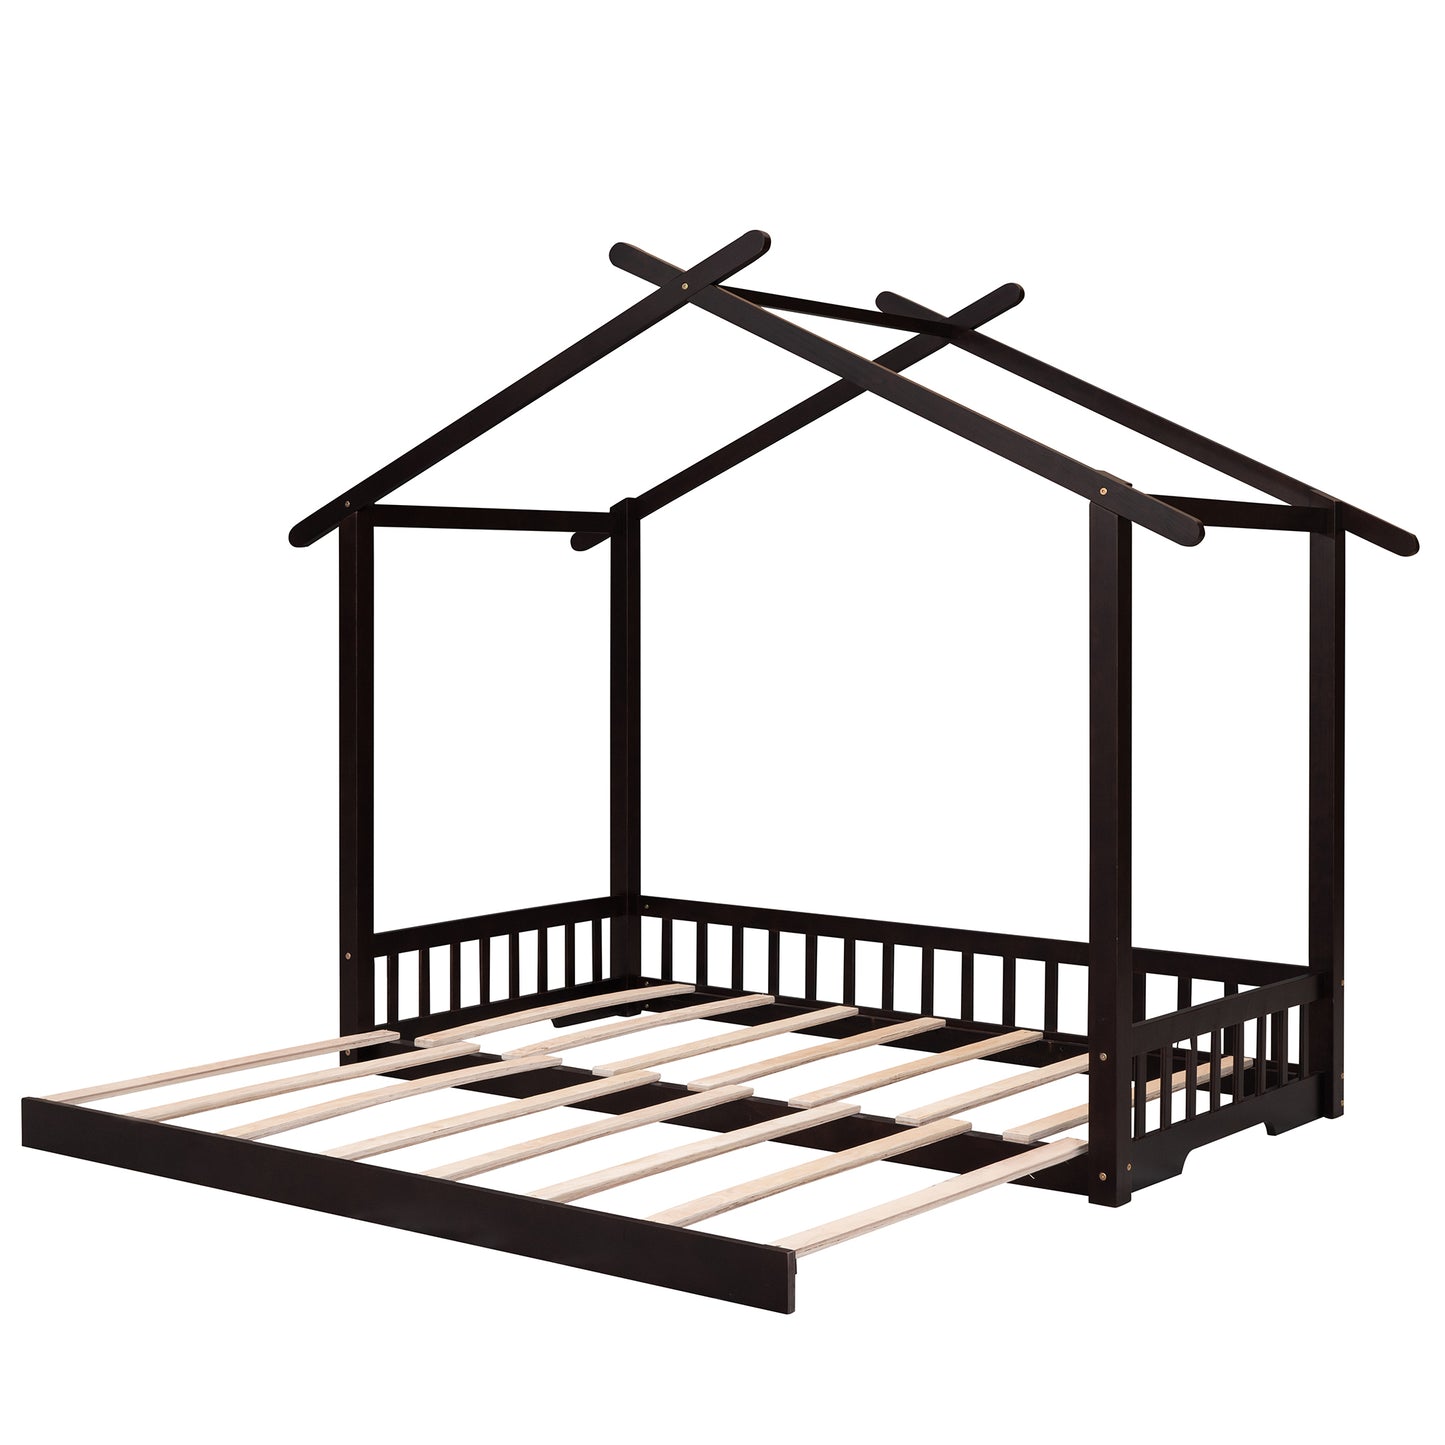 Extending House Bed, Wooden Daybed, Espresso